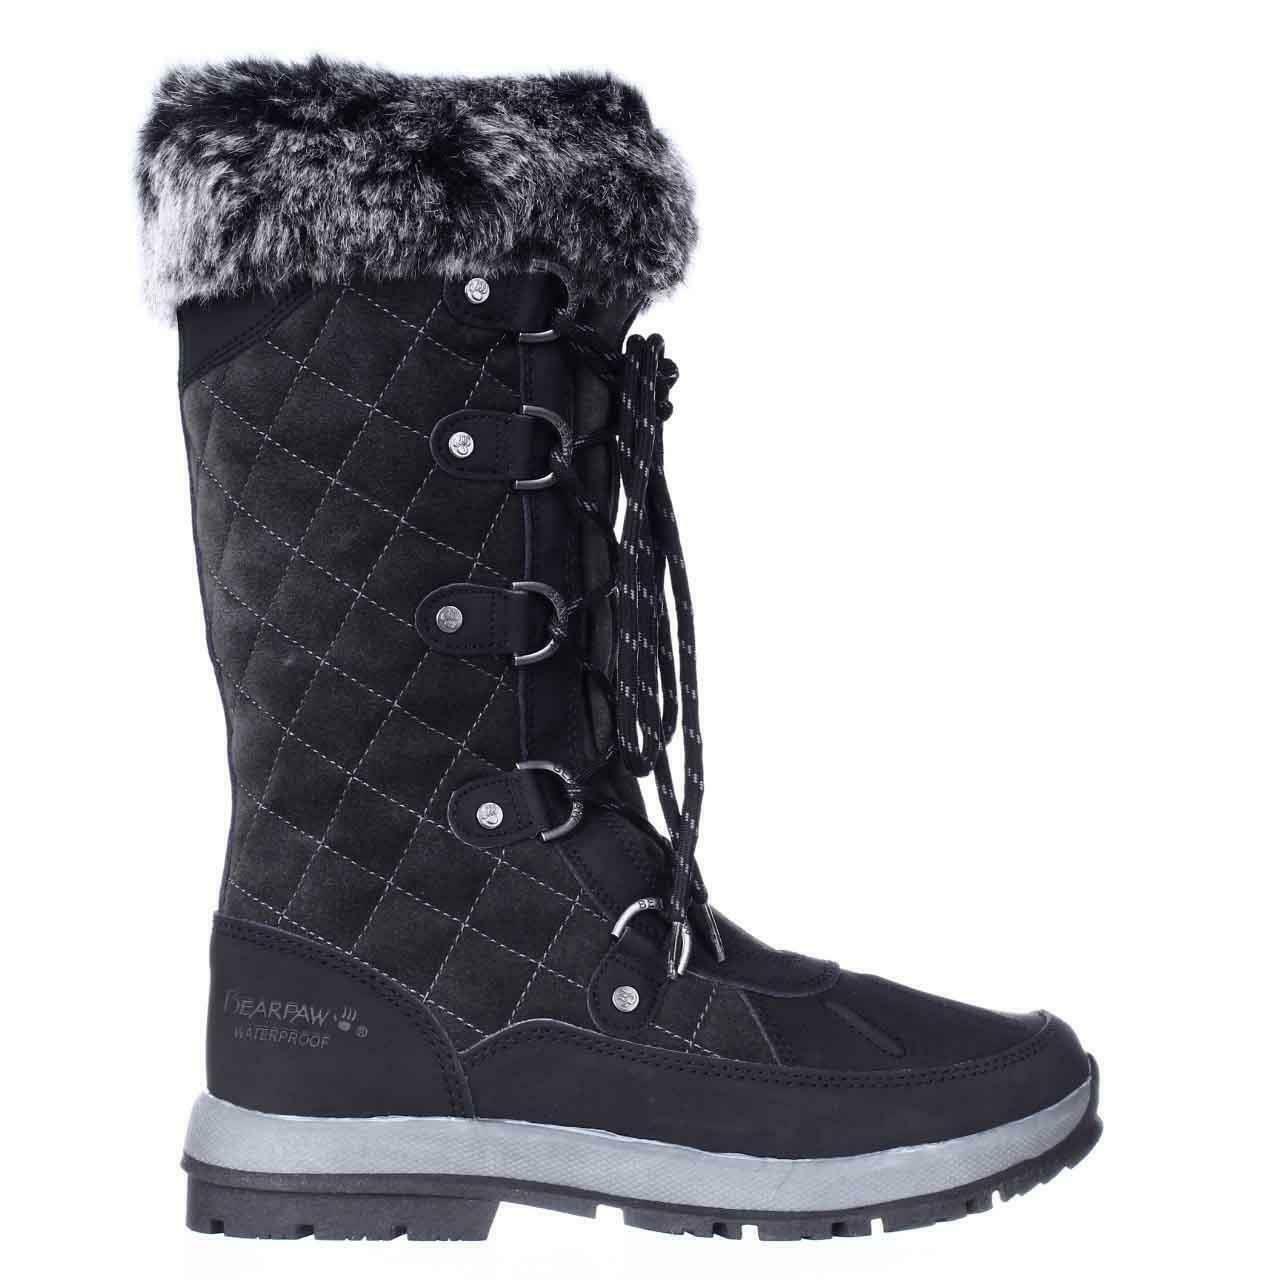 Bearpaw Gwyneth Never Wet Quilted Winter Boots, Black/Grey, 5 US / 36 ...